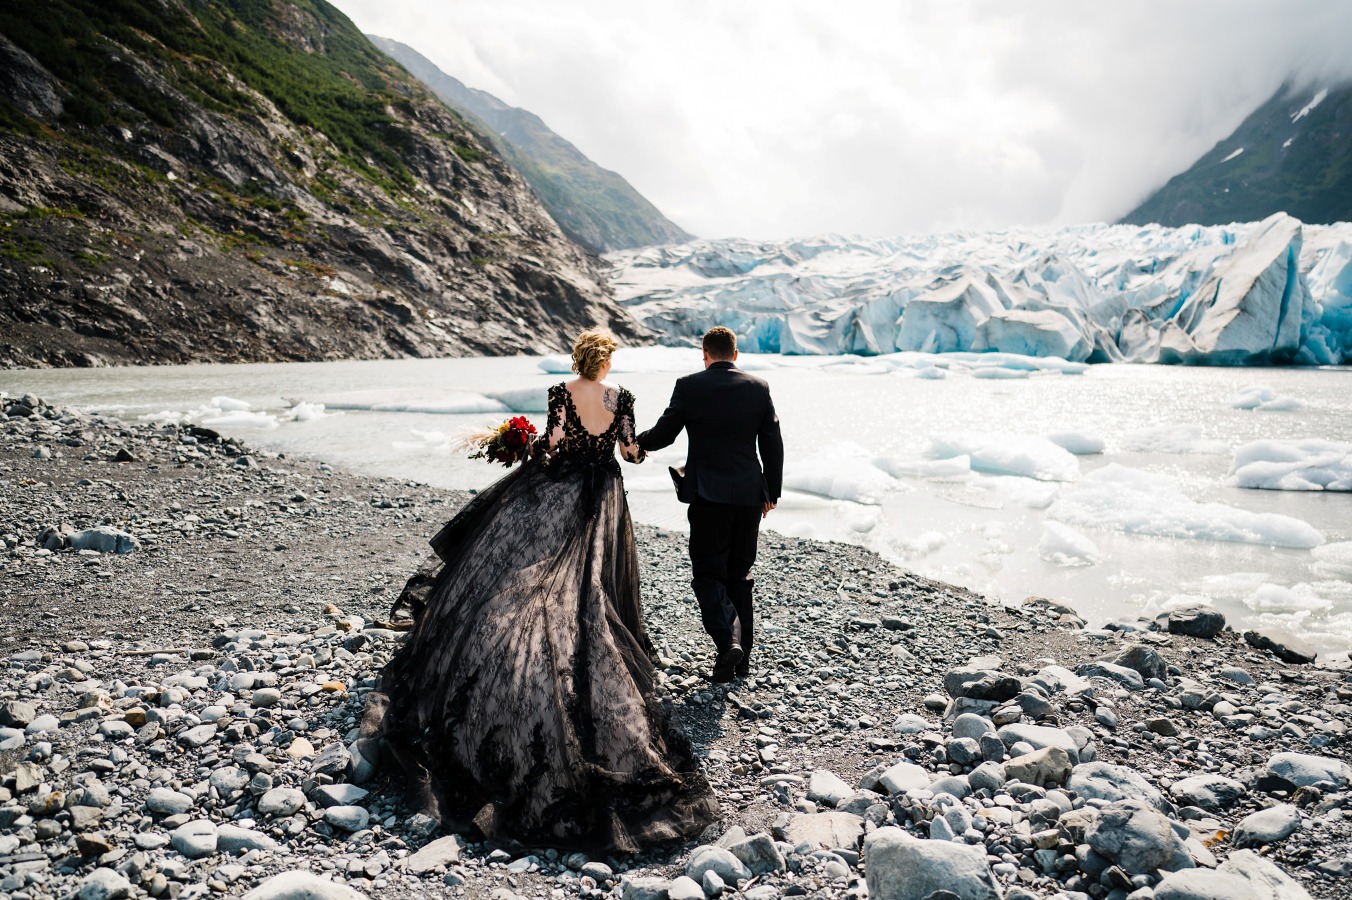 couple eloping in the mountains